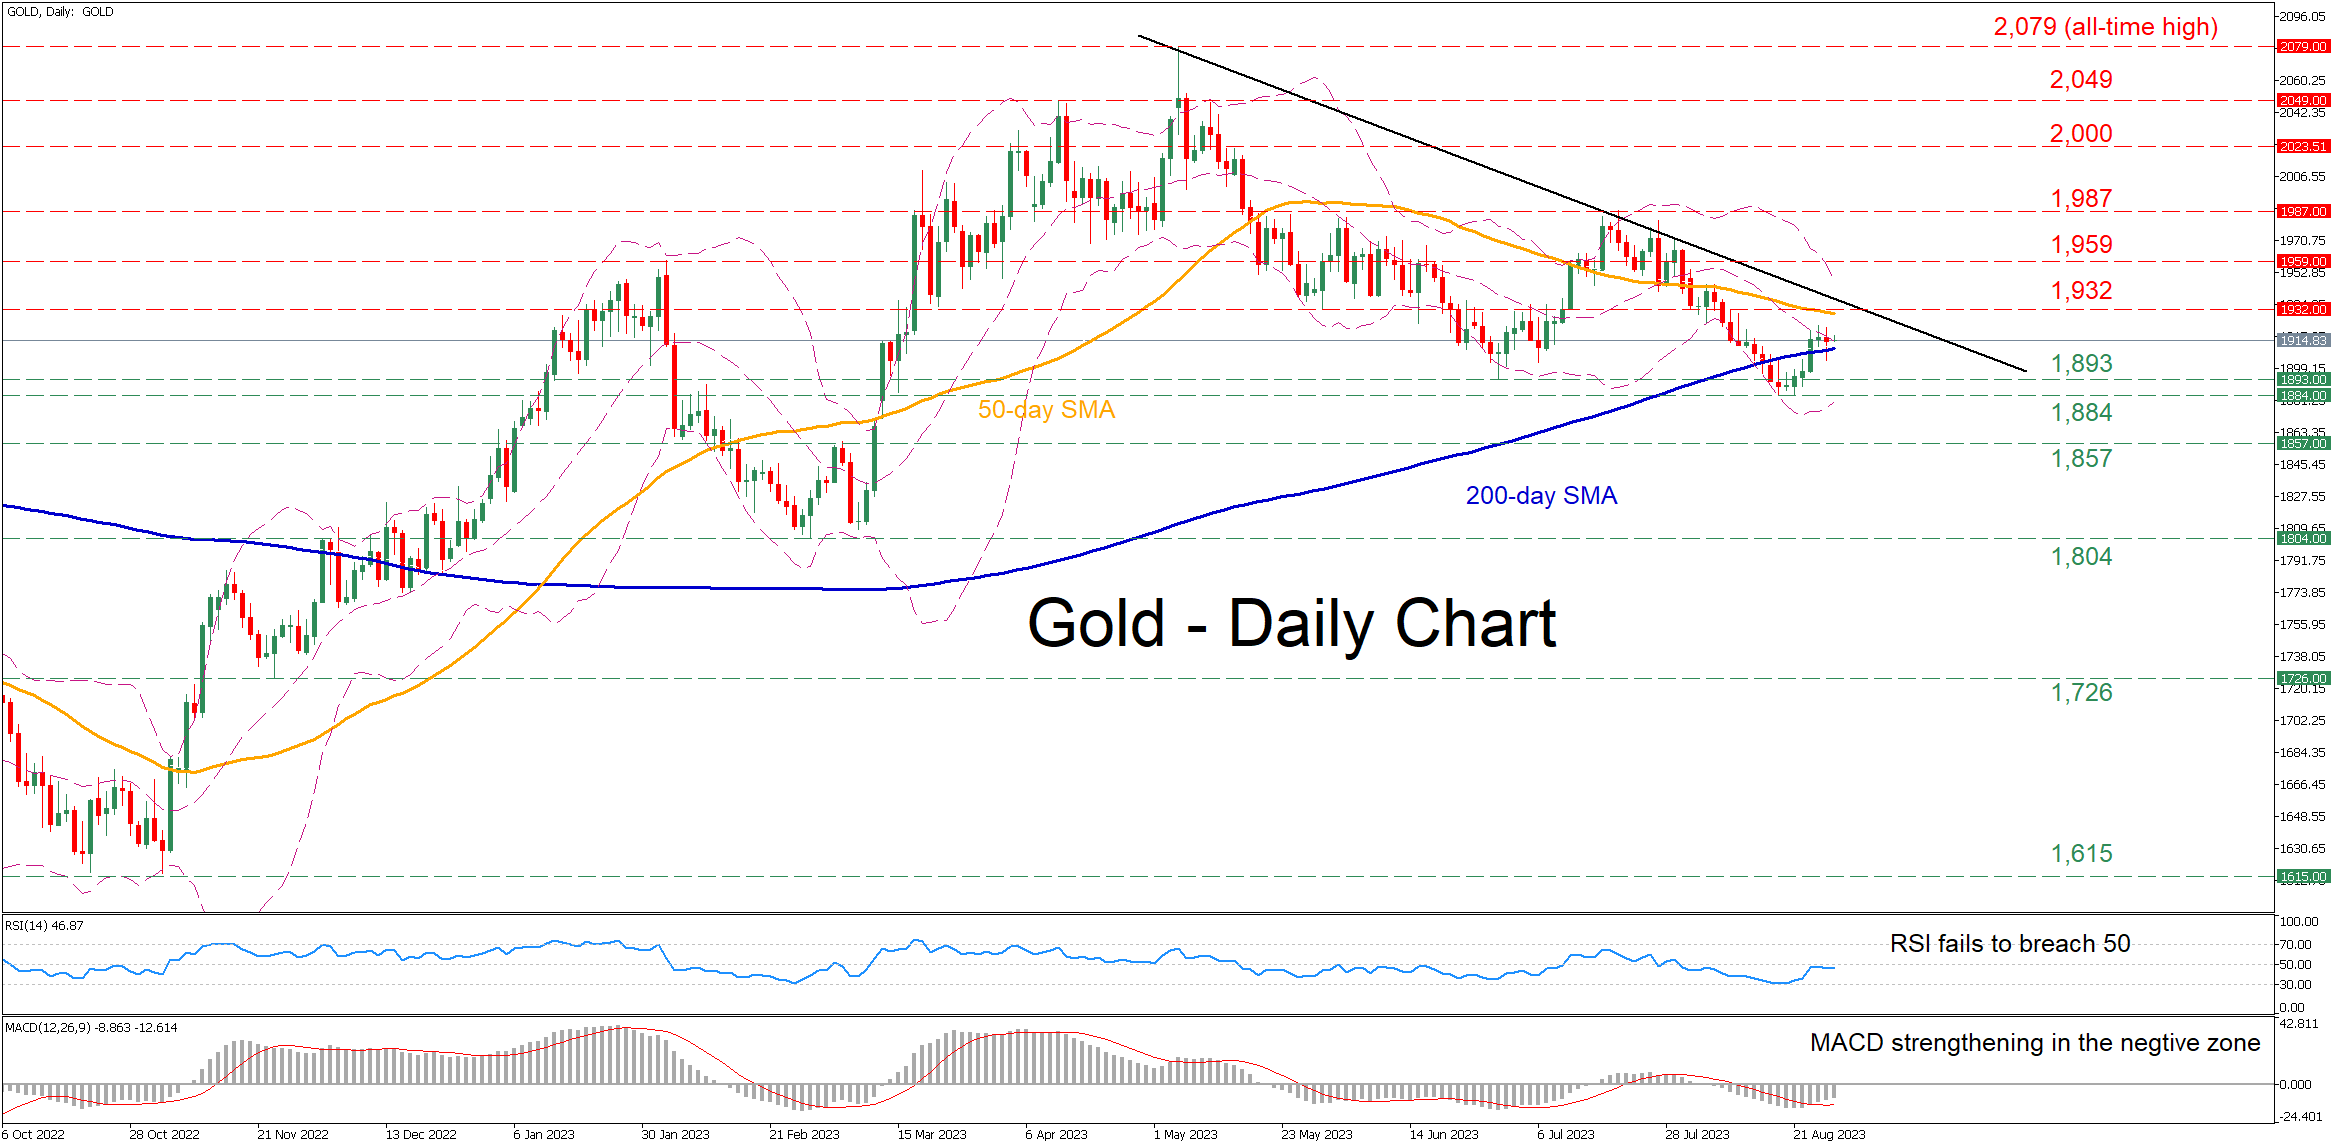 Technical Analysis – Gold reclaims 200-day SMA after bouncing off 5-month low